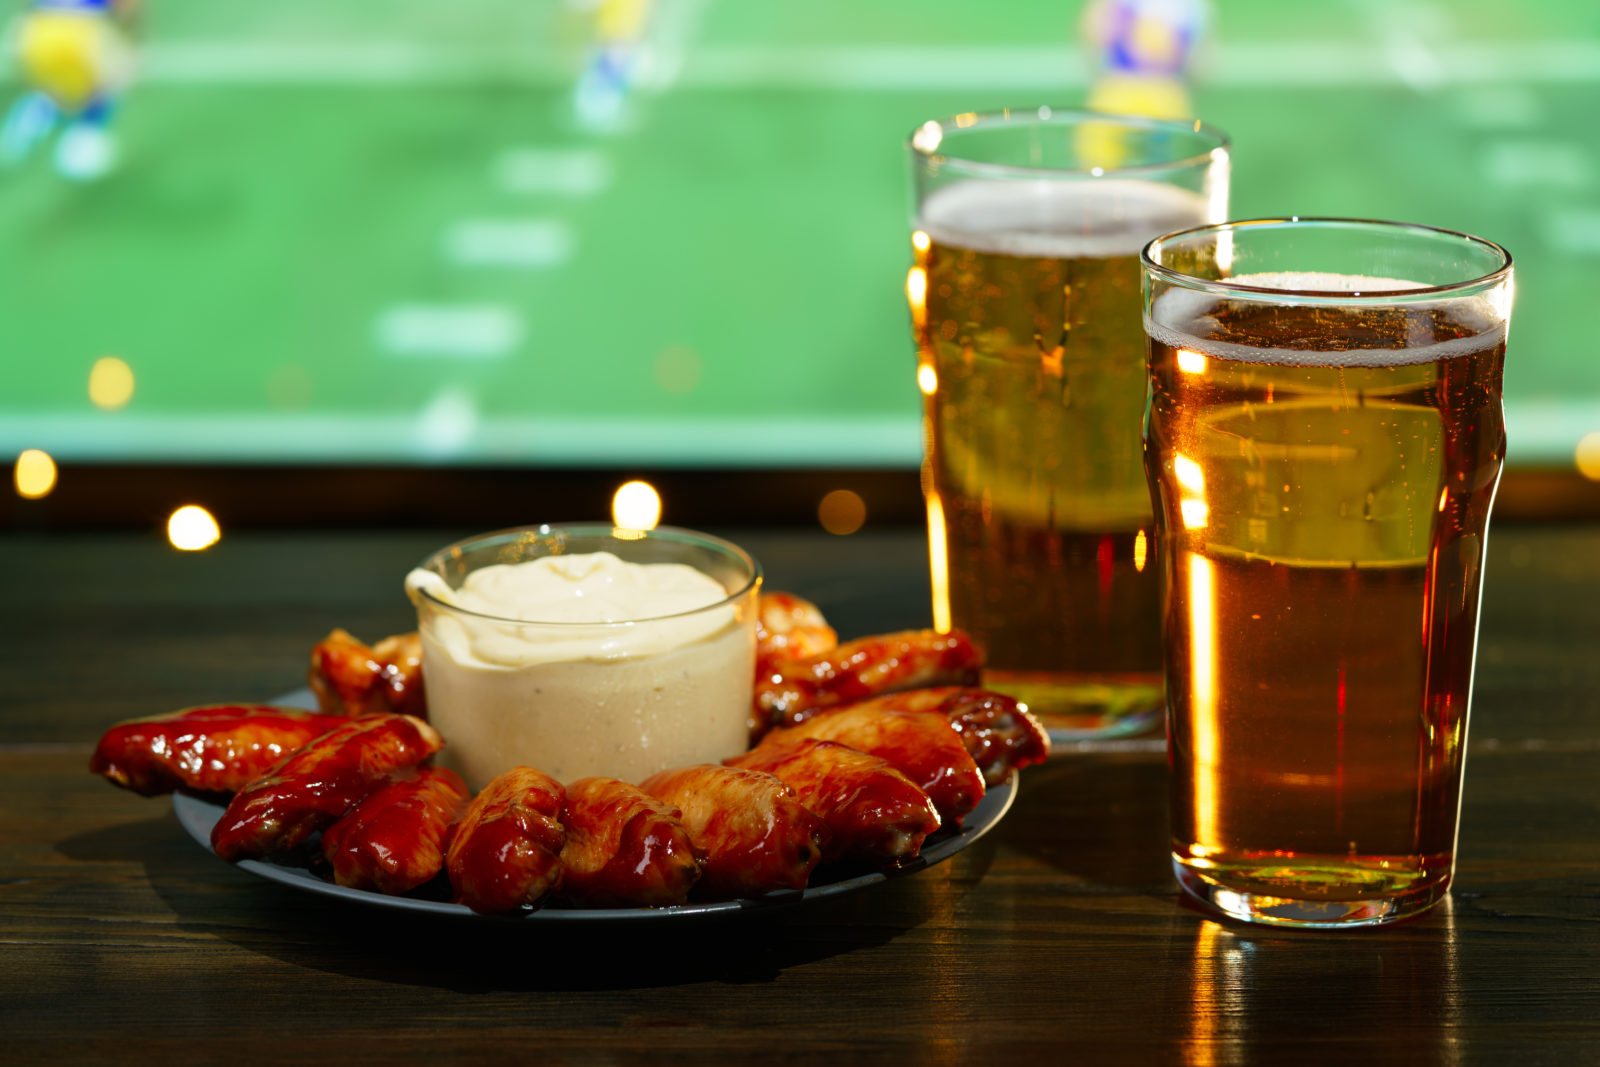 Hot barbecue chicken wings with 2 beer glasses on a dark wooden table served with honey mustard sauce. Football on a background, high resolution 2023/02/AdobeStock_251013213.jpeg 